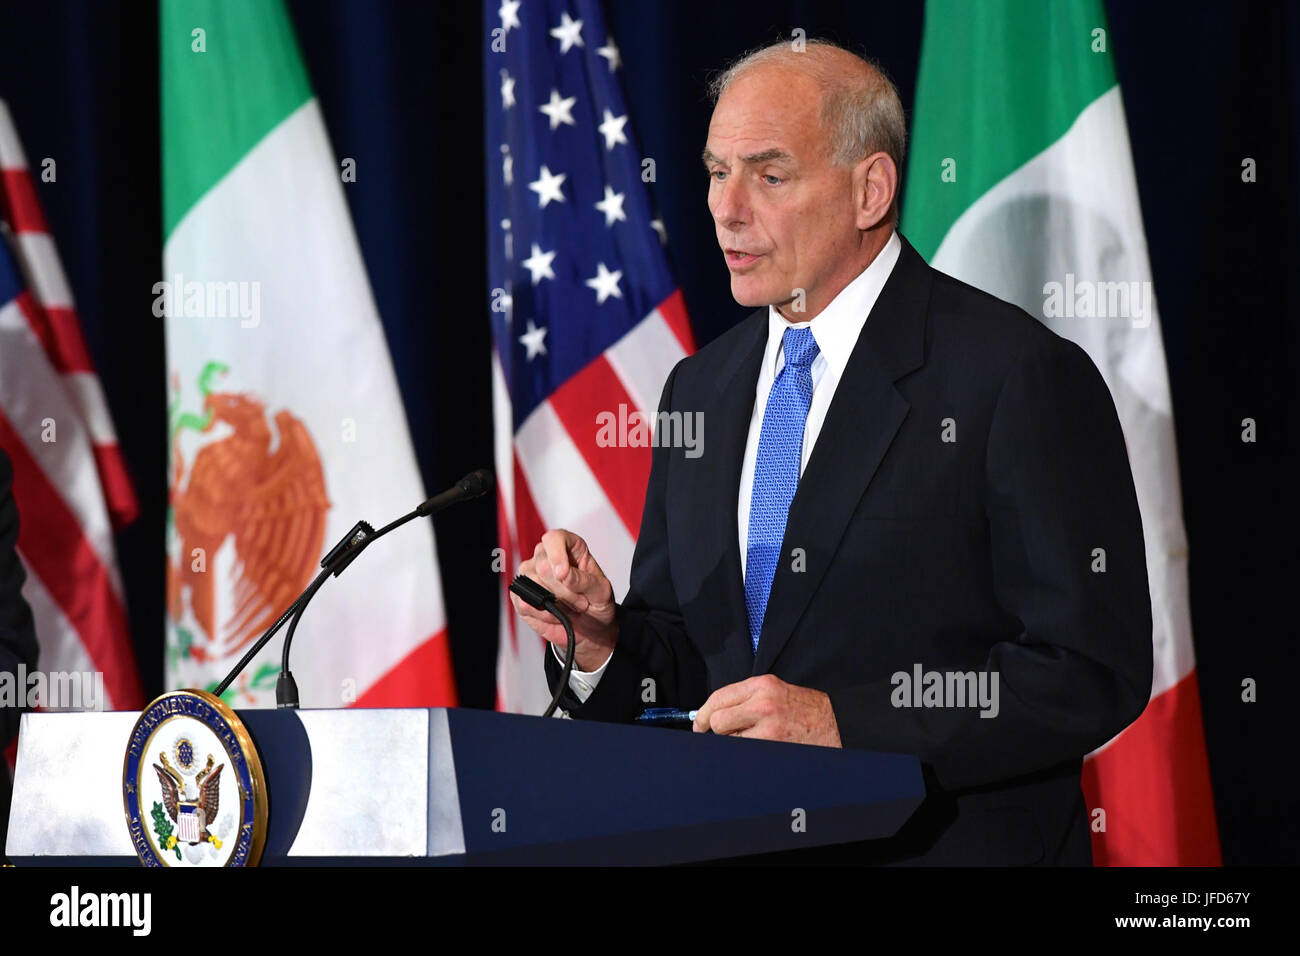 U.S. Secretary of Homeland Security John F. Kelly addresses reporters at a press conference with U.S. Secretary of State Rex Tillerson and their Mexican counterparts, Foreign Secretary Luis Videgaray Caso and Secretary of Government Miguel Angel Osorio Chong, following their high-level dialogue on strategies to combat transnational criminal organizations, at the U.S. Department of State in Washington, D.C., on May 18, 2017. Stock Photo